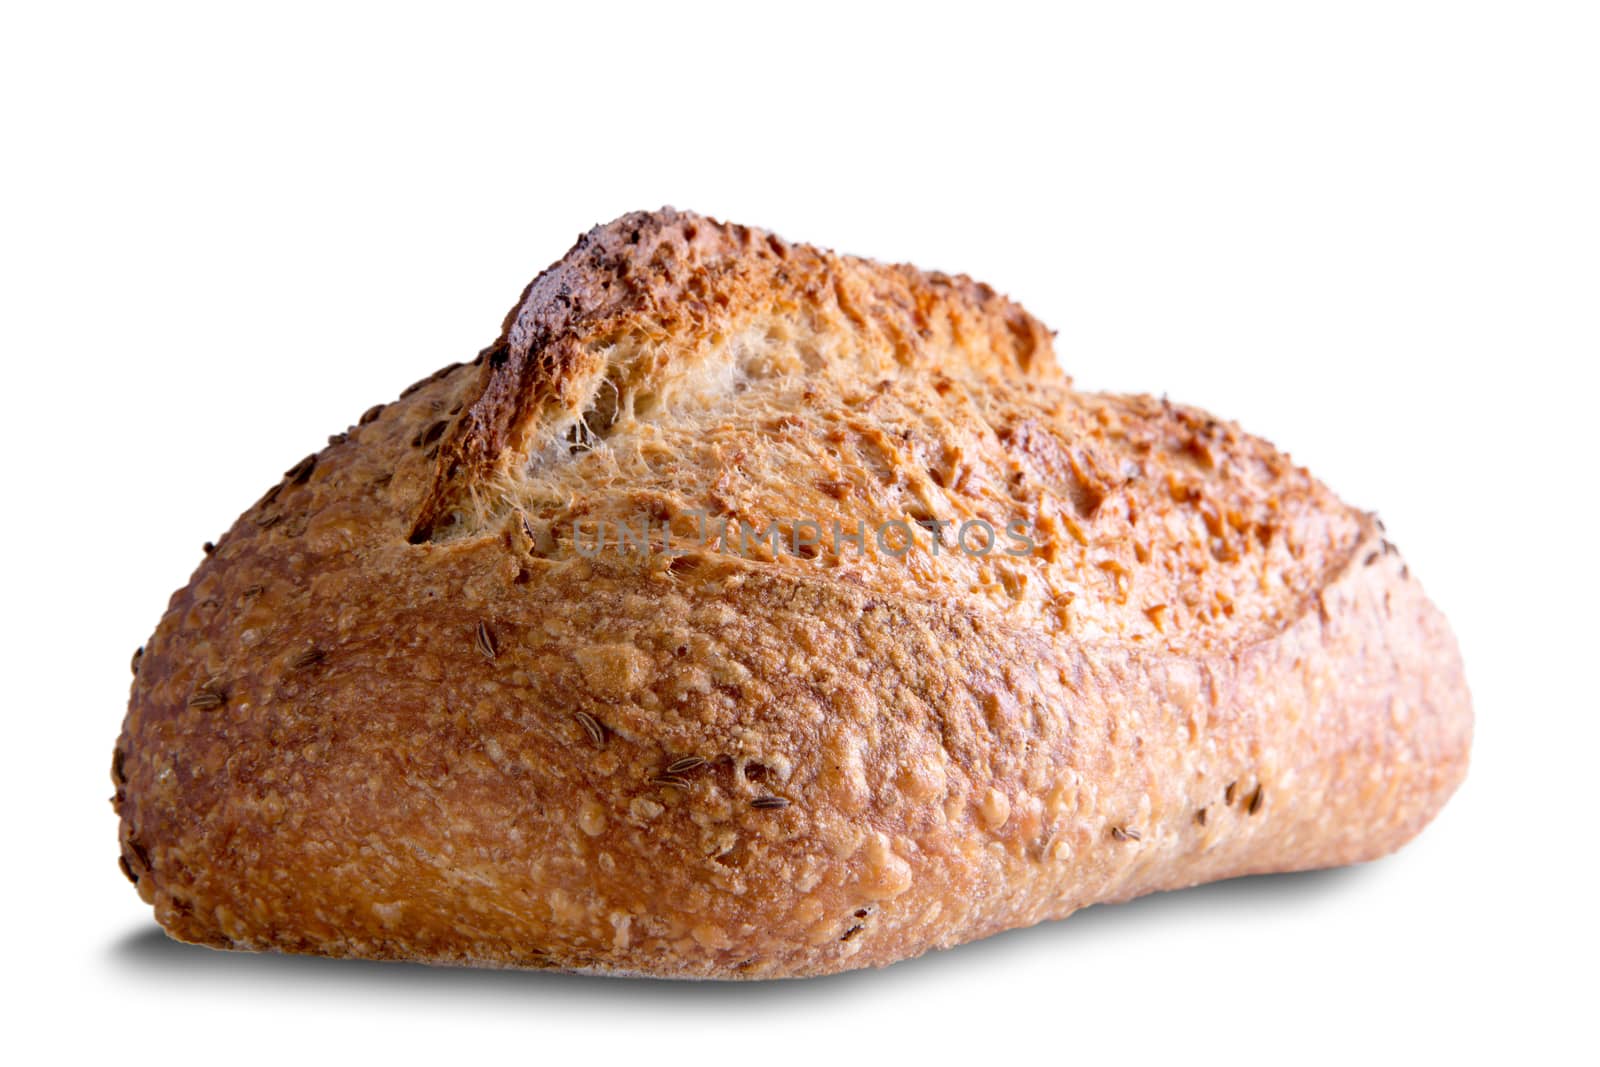 Close up Edge View of a Tasty Homemade Rye Bread Isolated on a White Background